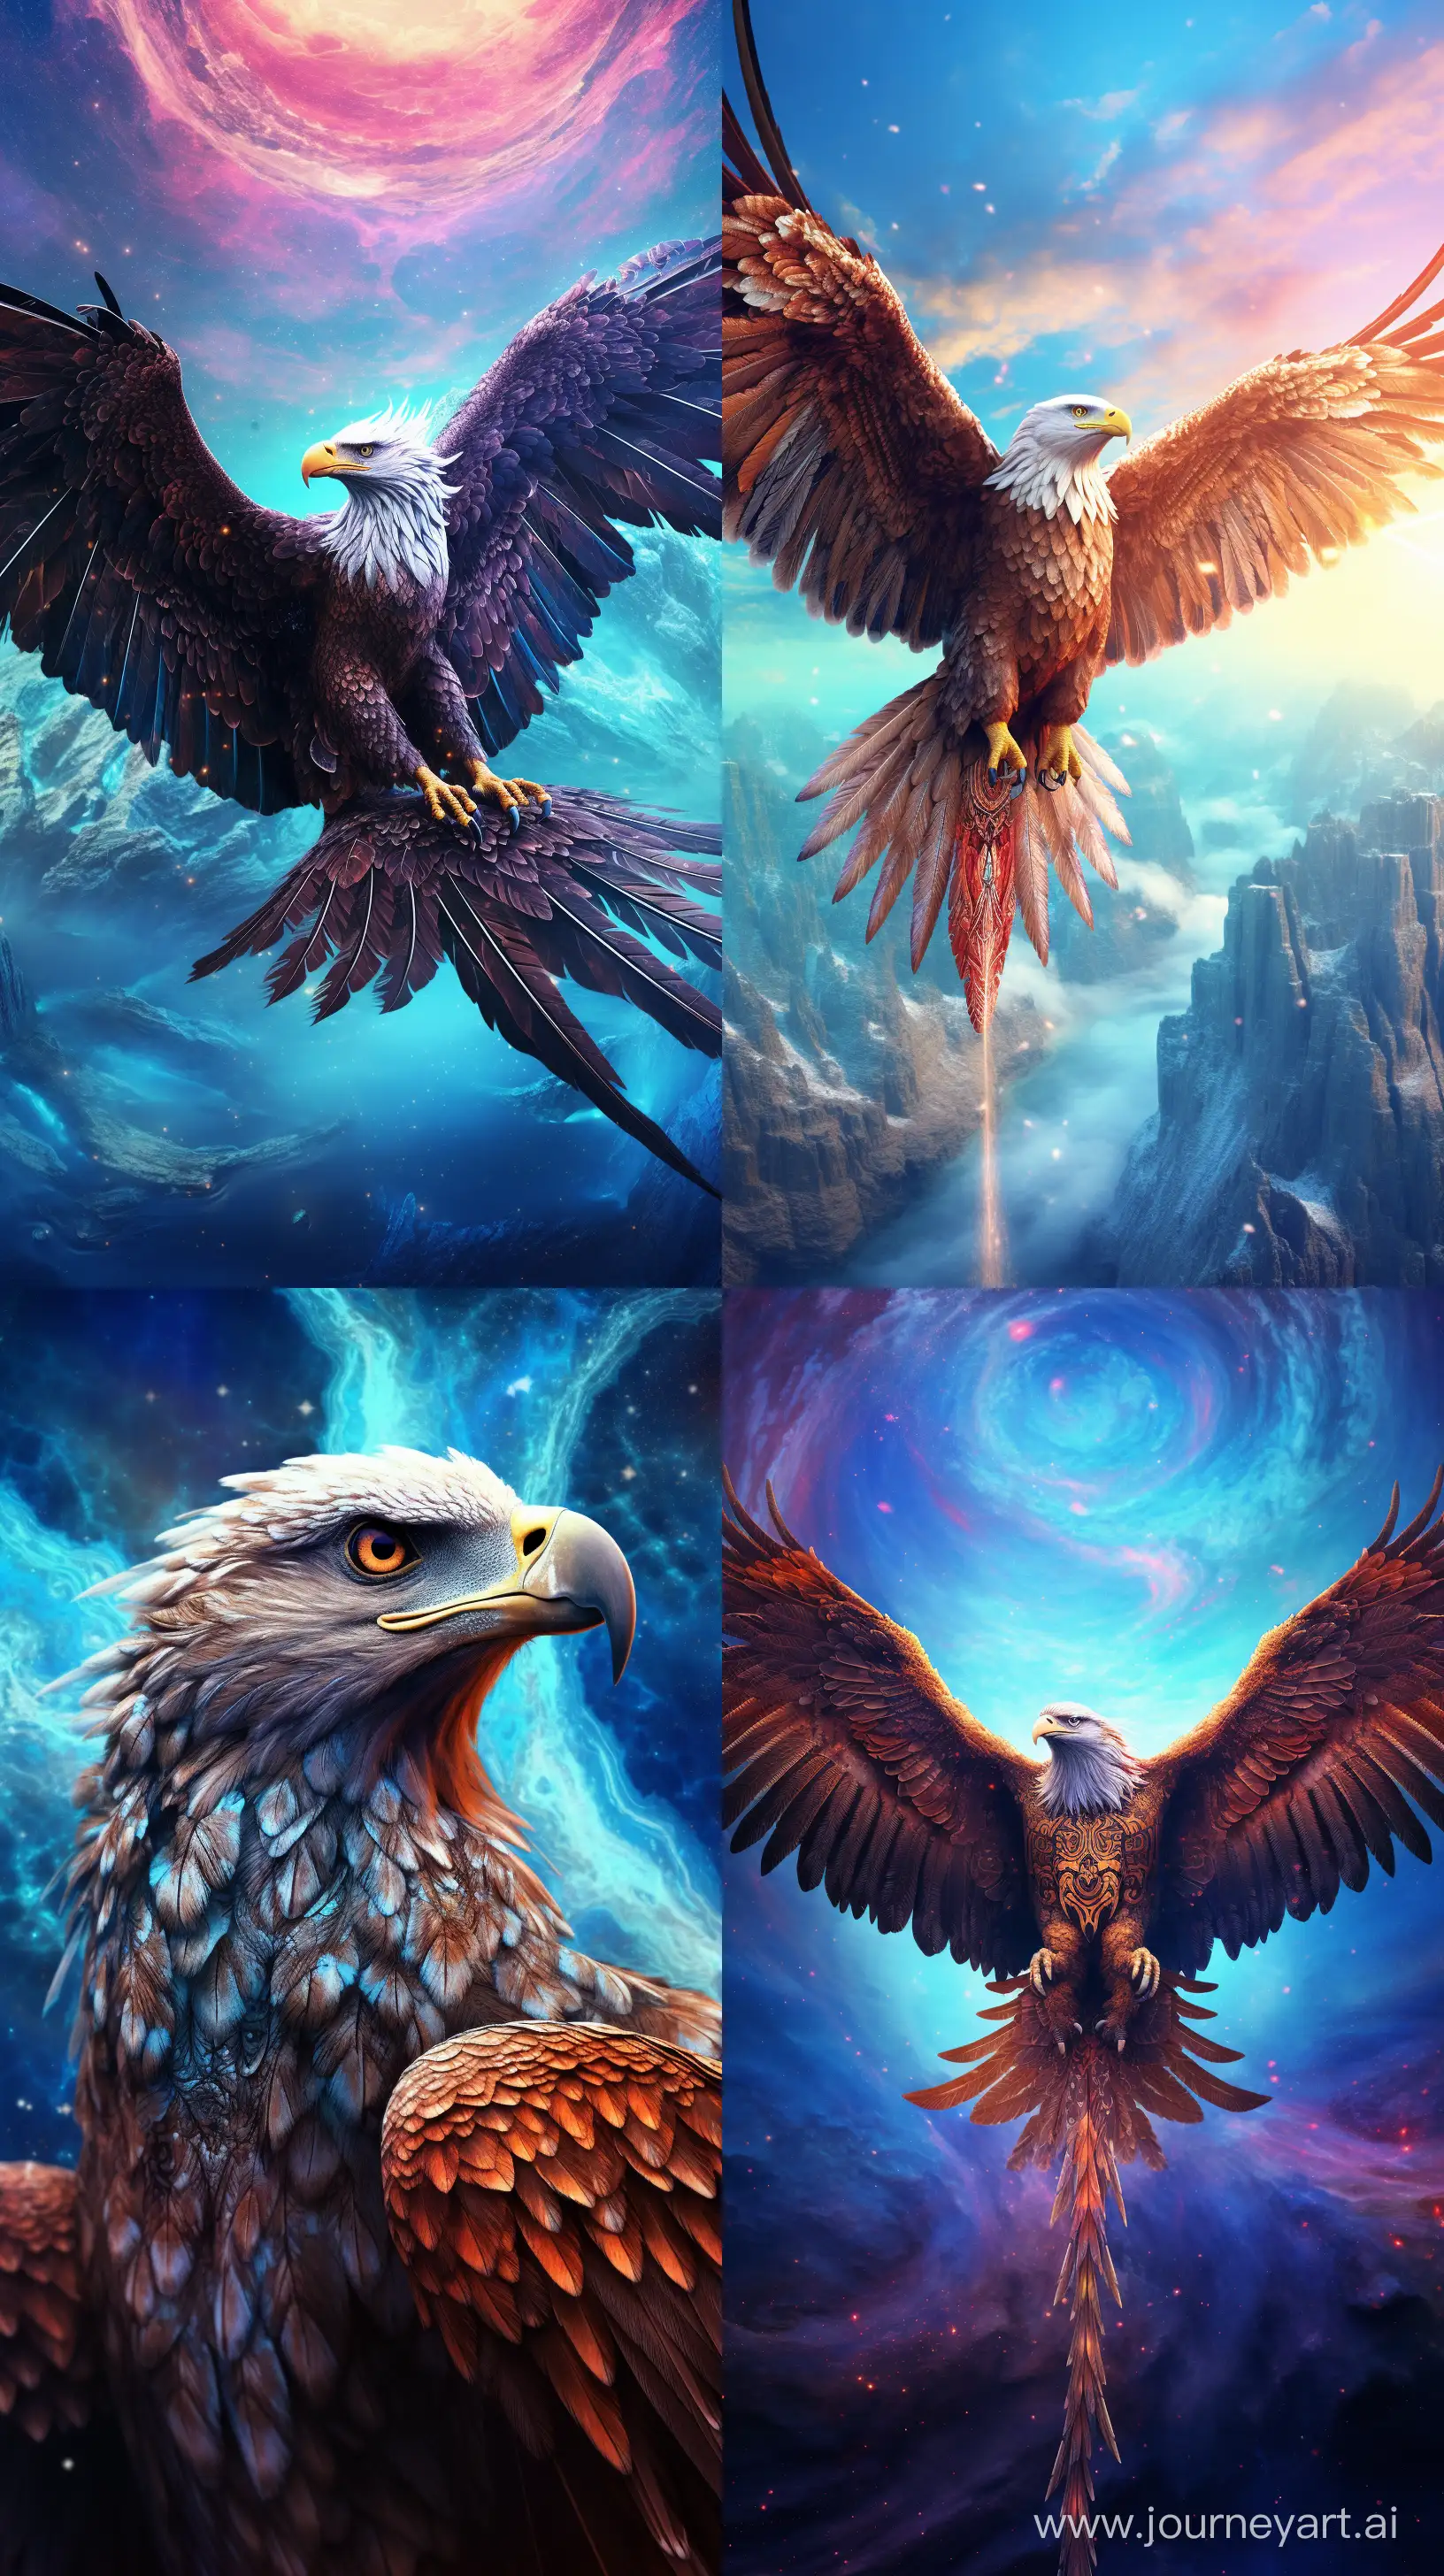 colorful images of a giant eagle from Hinduism with 2 heads but a single body, floating in the sky, intricate details, closeup image, celestial background, 8k quality --ar 9:16 